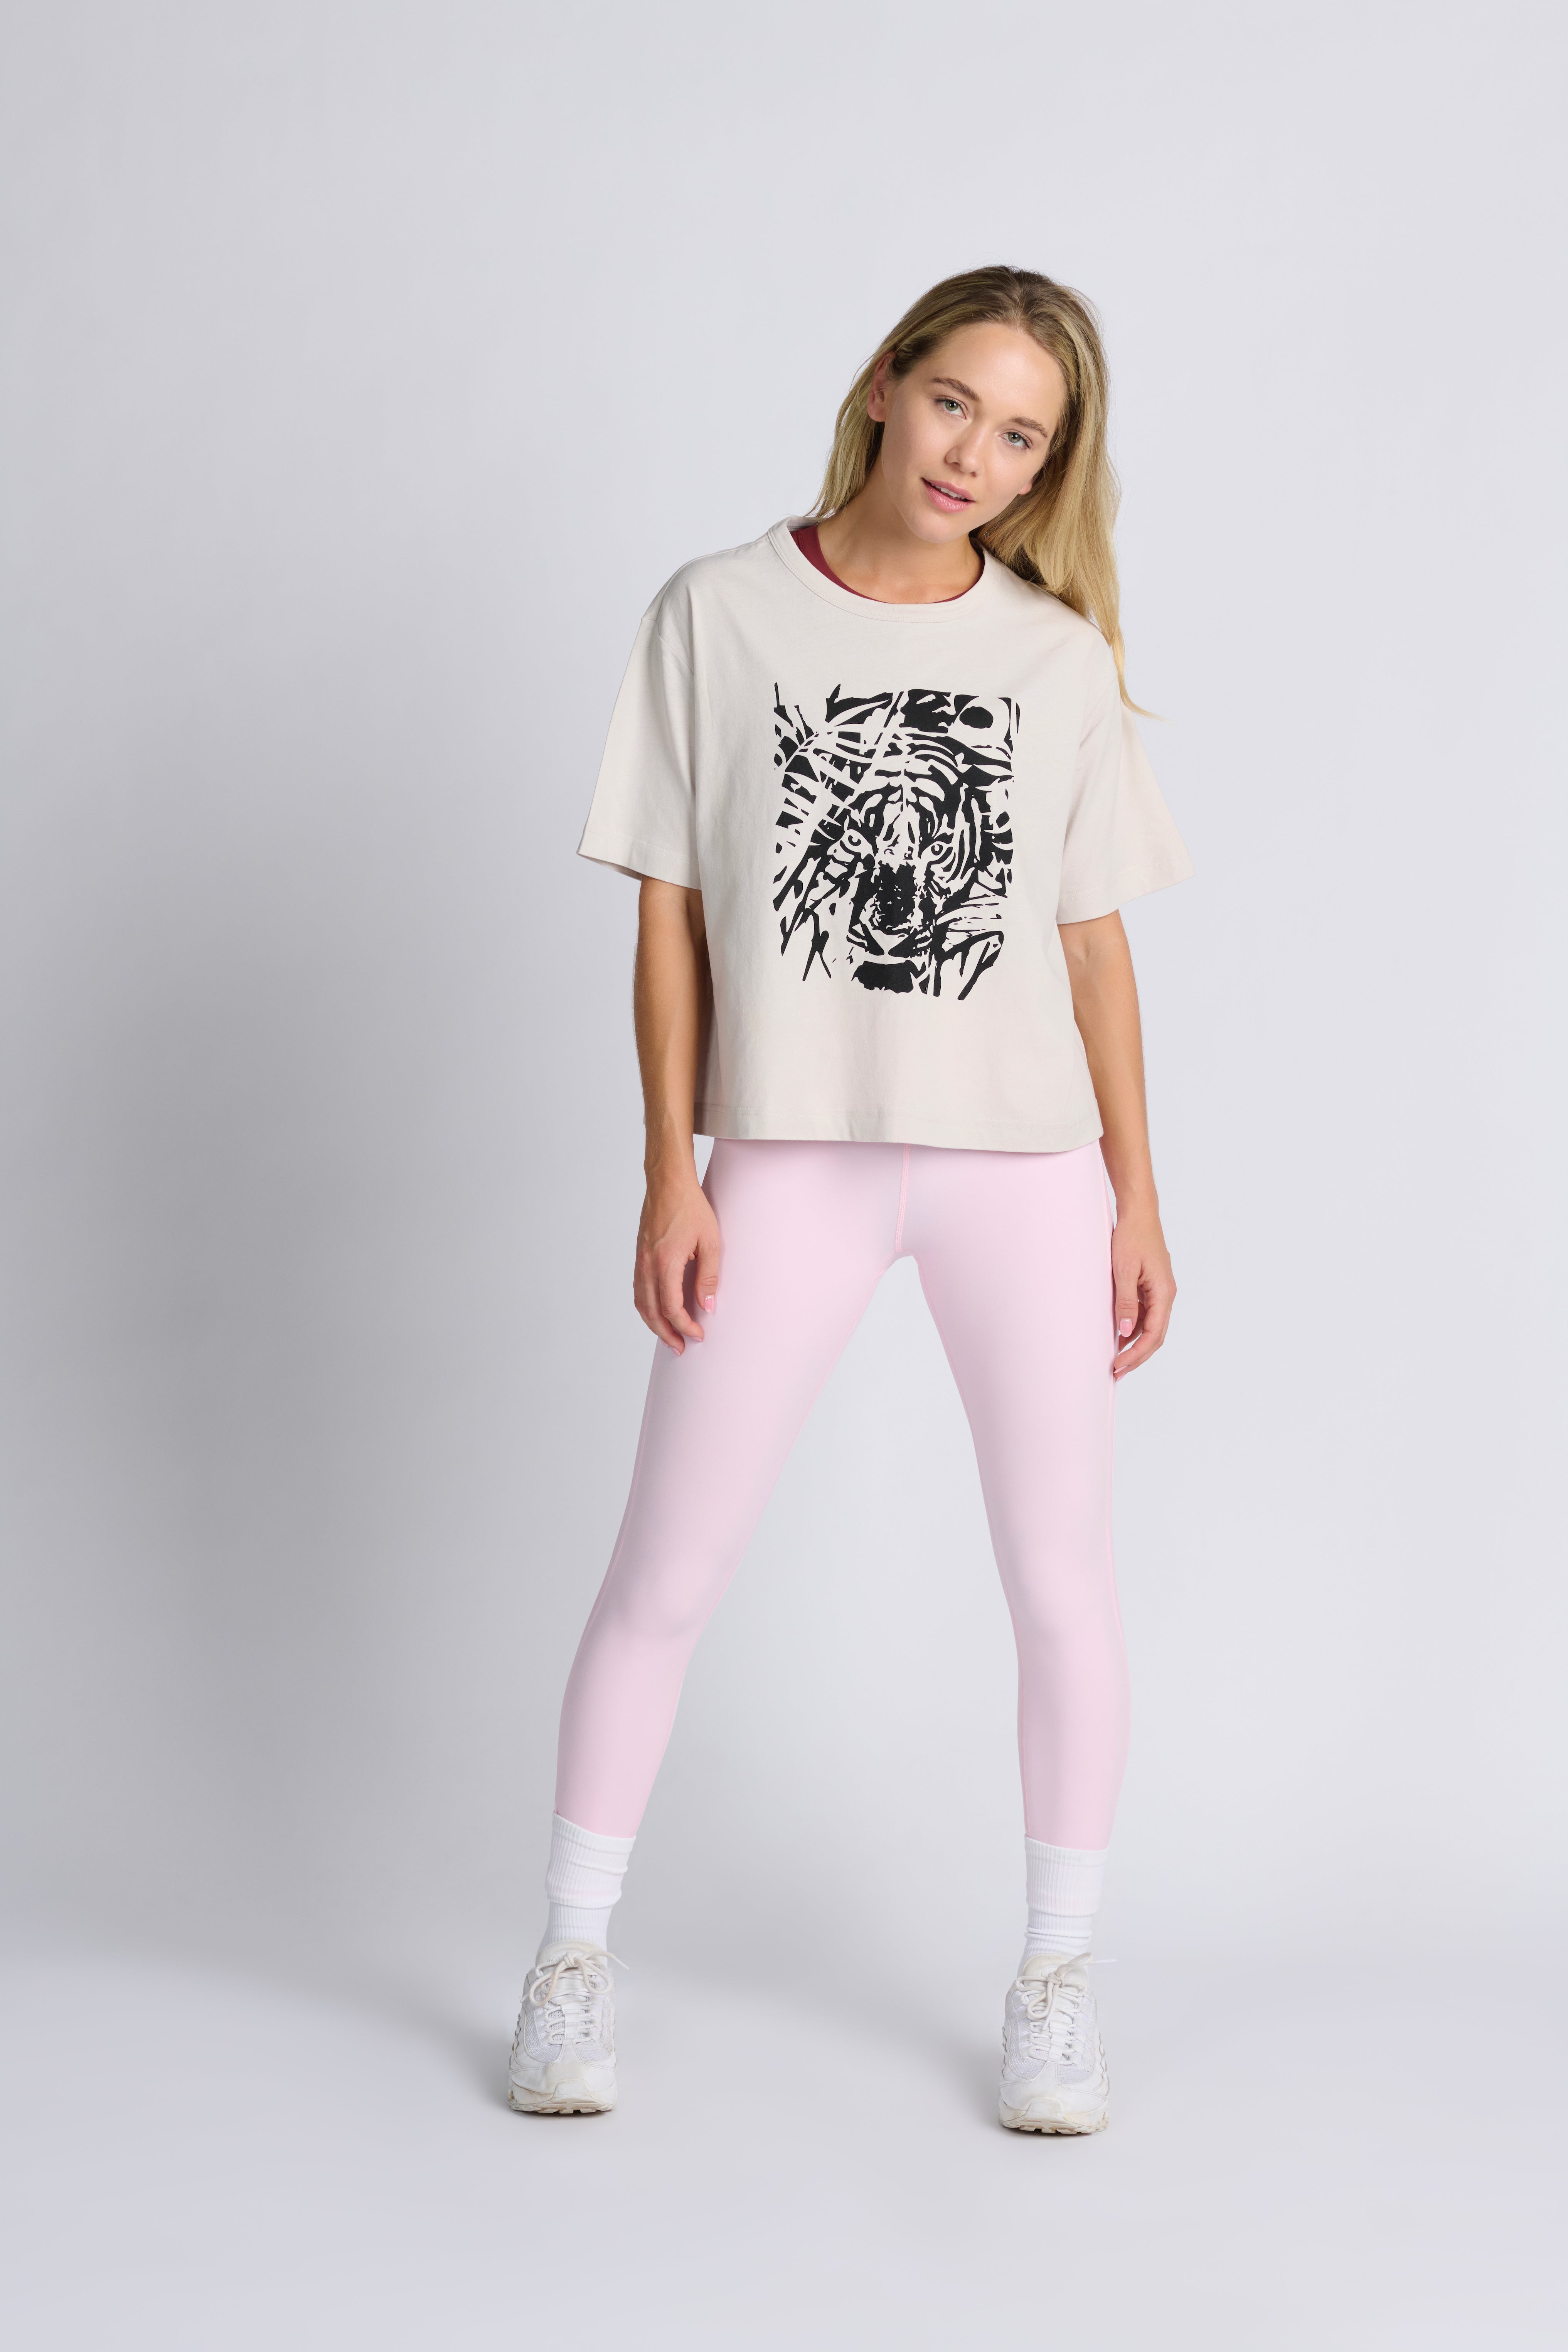 Tiger T-Shirt - super soft and luxurious feel